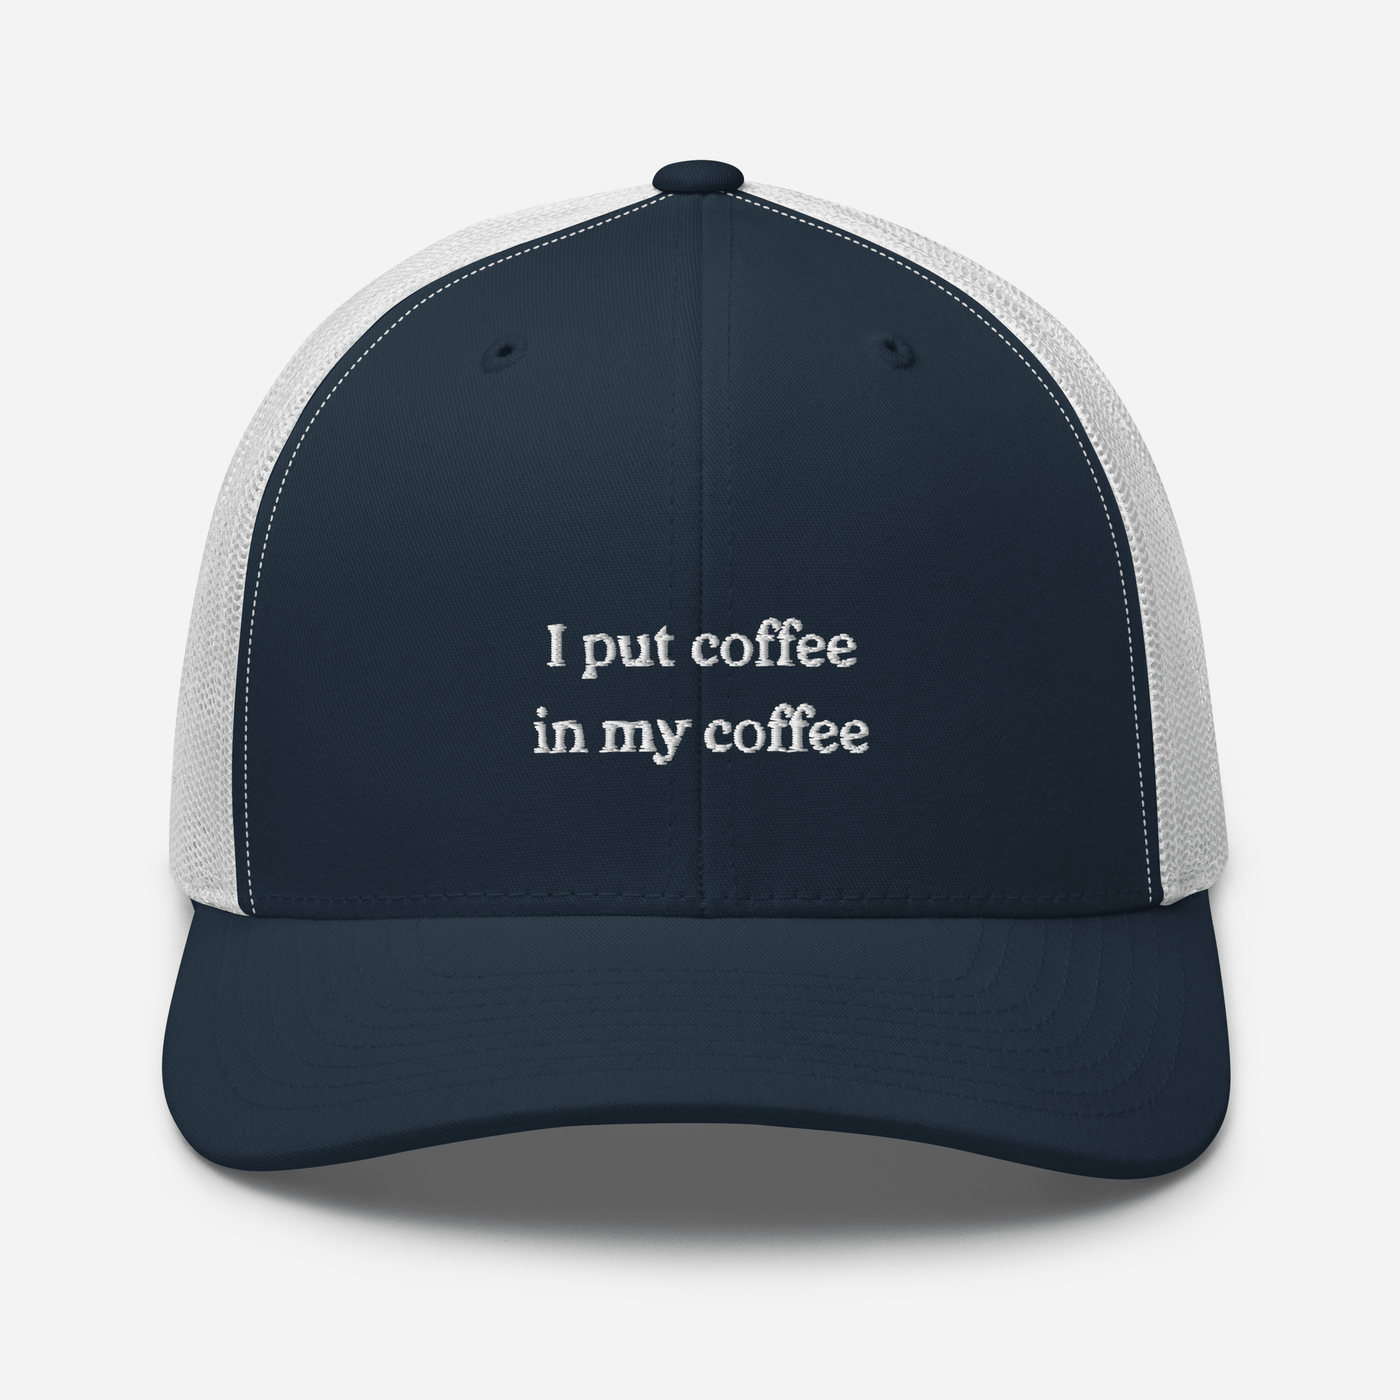 I put coffee in my coffee Trucker Cap - Navy/ White - - Just Another Cap Store